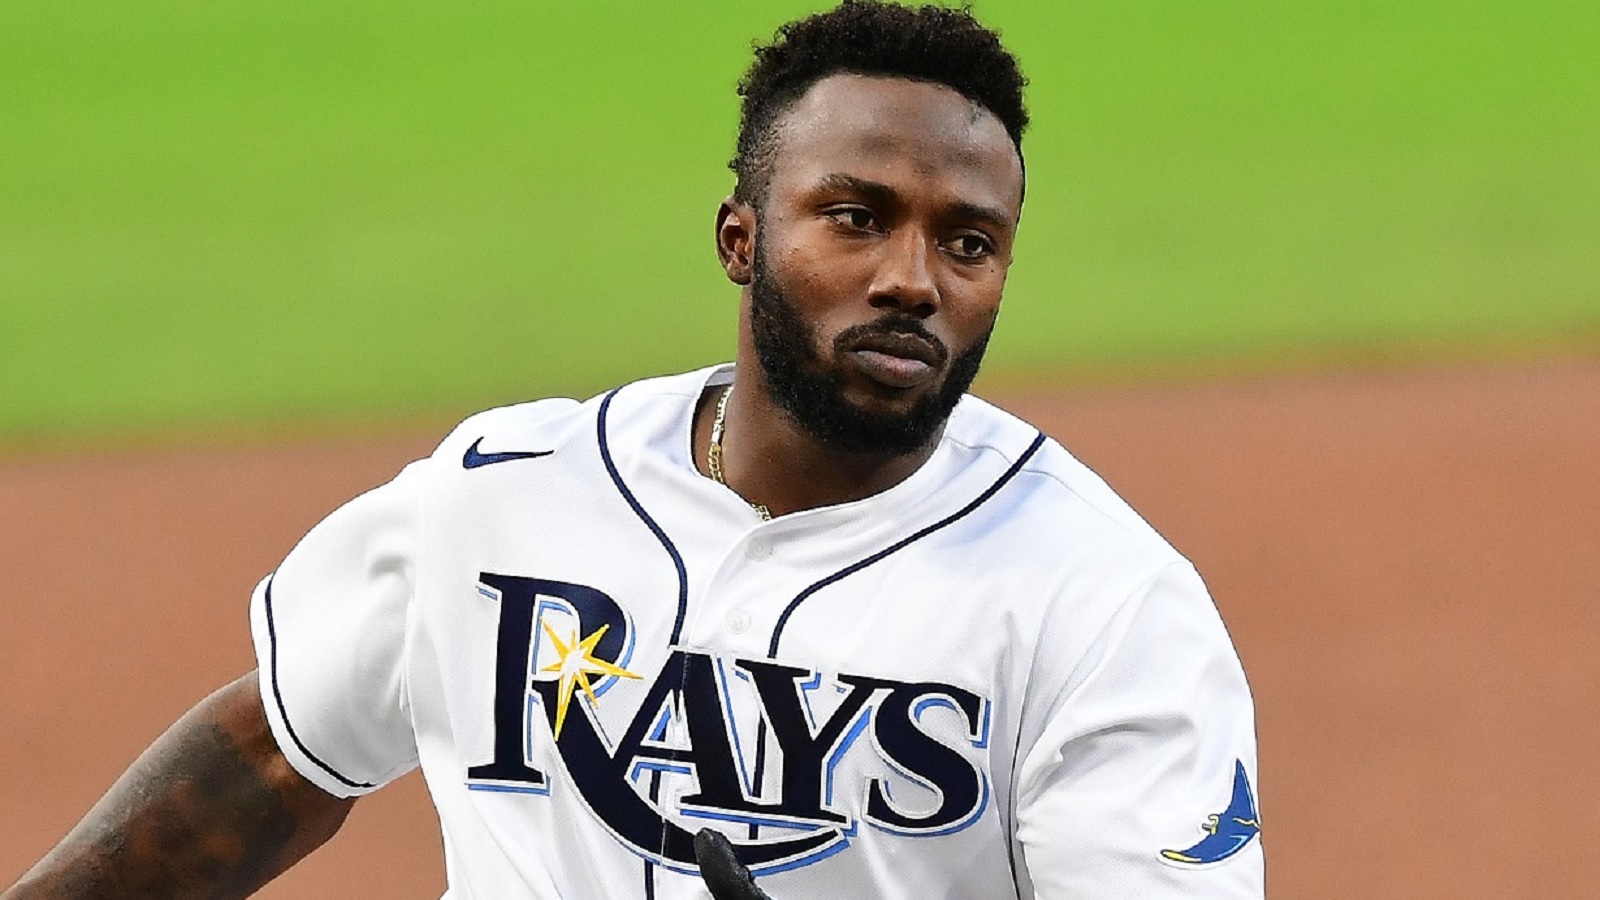 For Rays' Randy Arozarena, an info boost leads to an All-Star turn